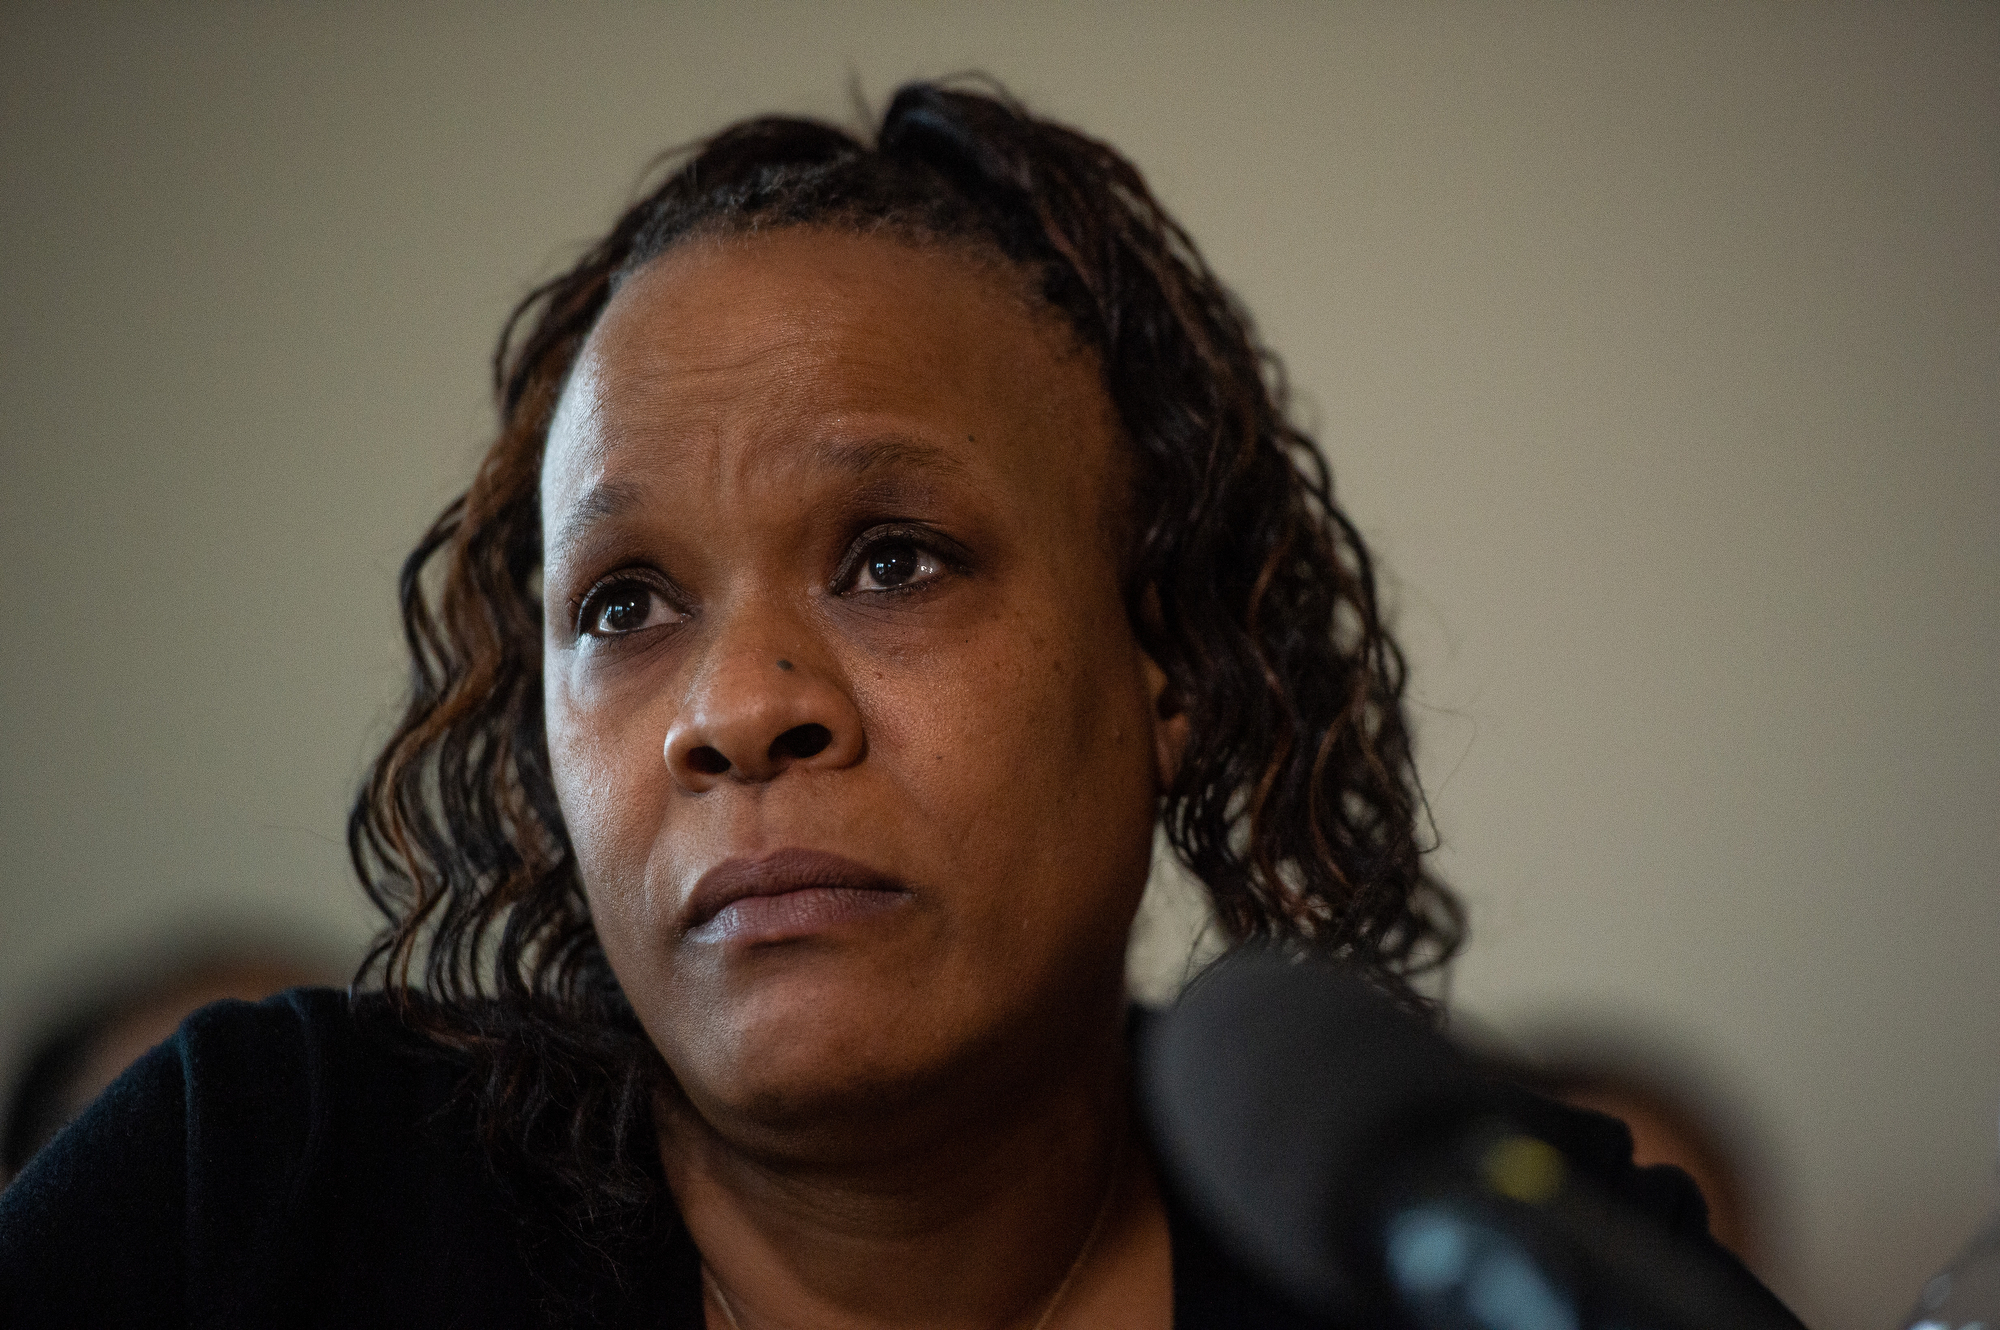 Tammi Bell answers questions about the killing of her son, Kevin Peterson, Jr., by police in Clark County, during a press conference at the Aero Club Banquet Room in Vancouver on Thursday morning, March 18, 2021.